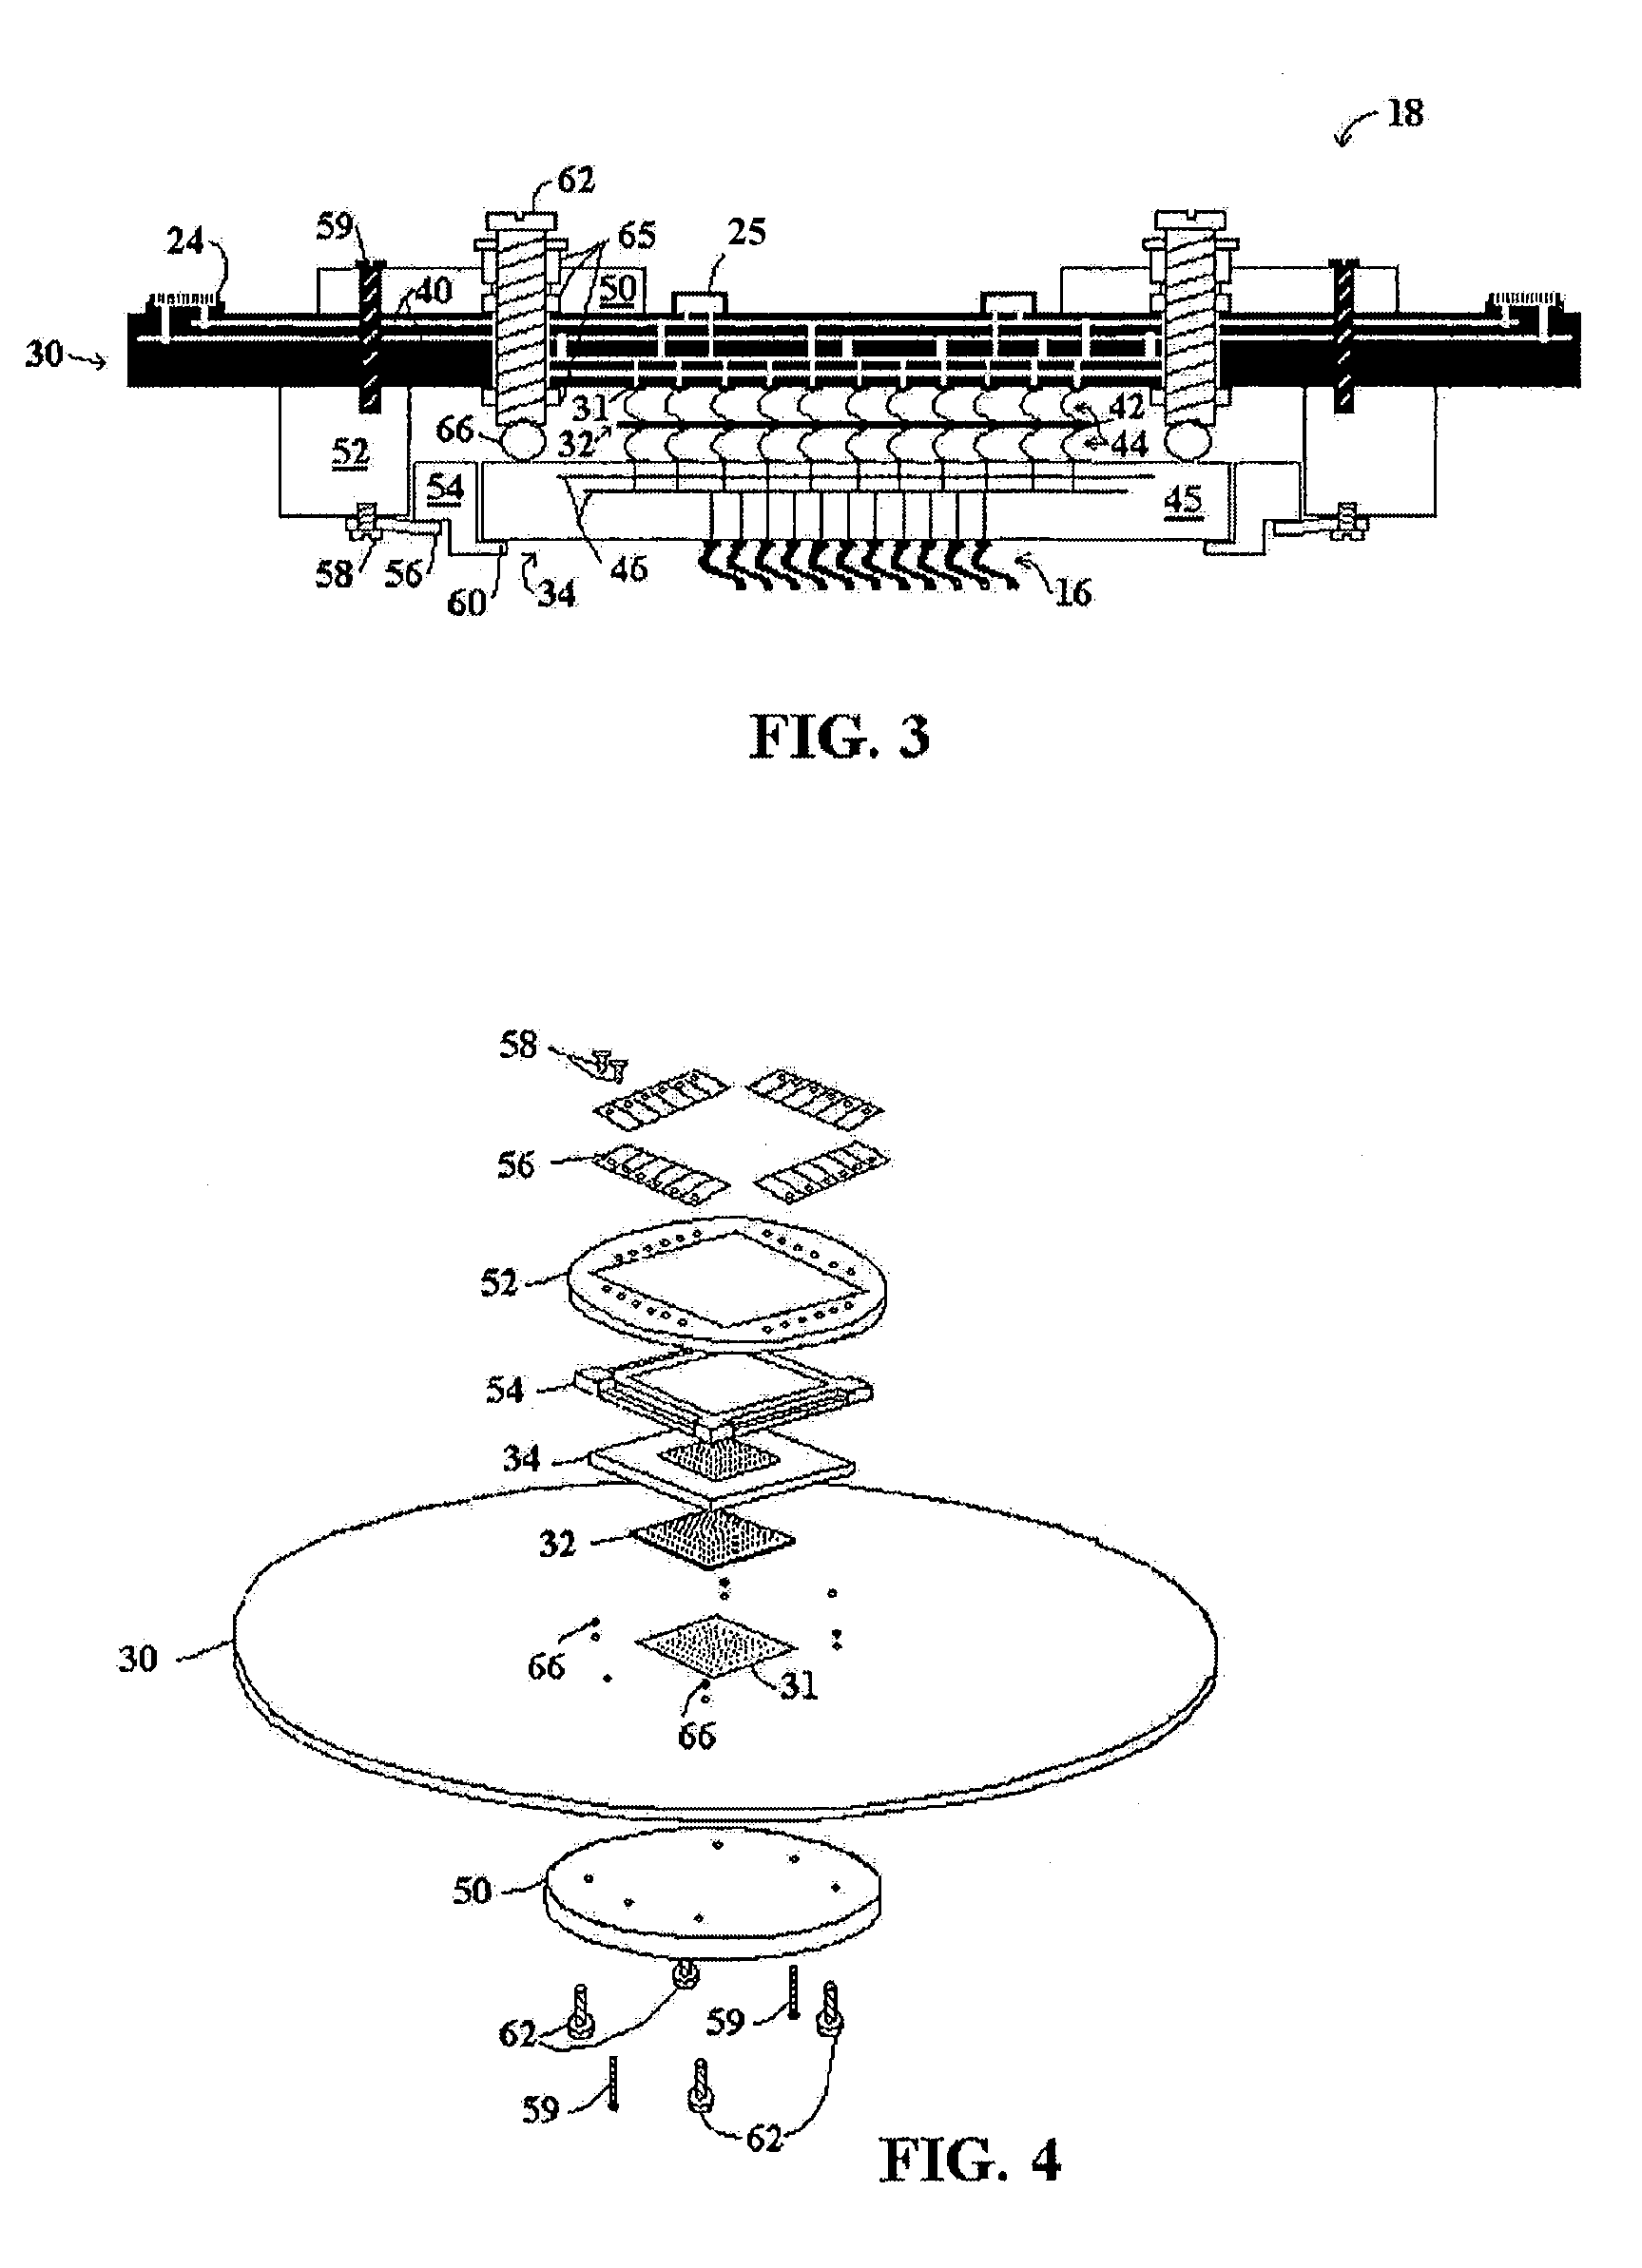 Probe card assembly including a programmable device to selectively route signals from channels of a test system controller to probes